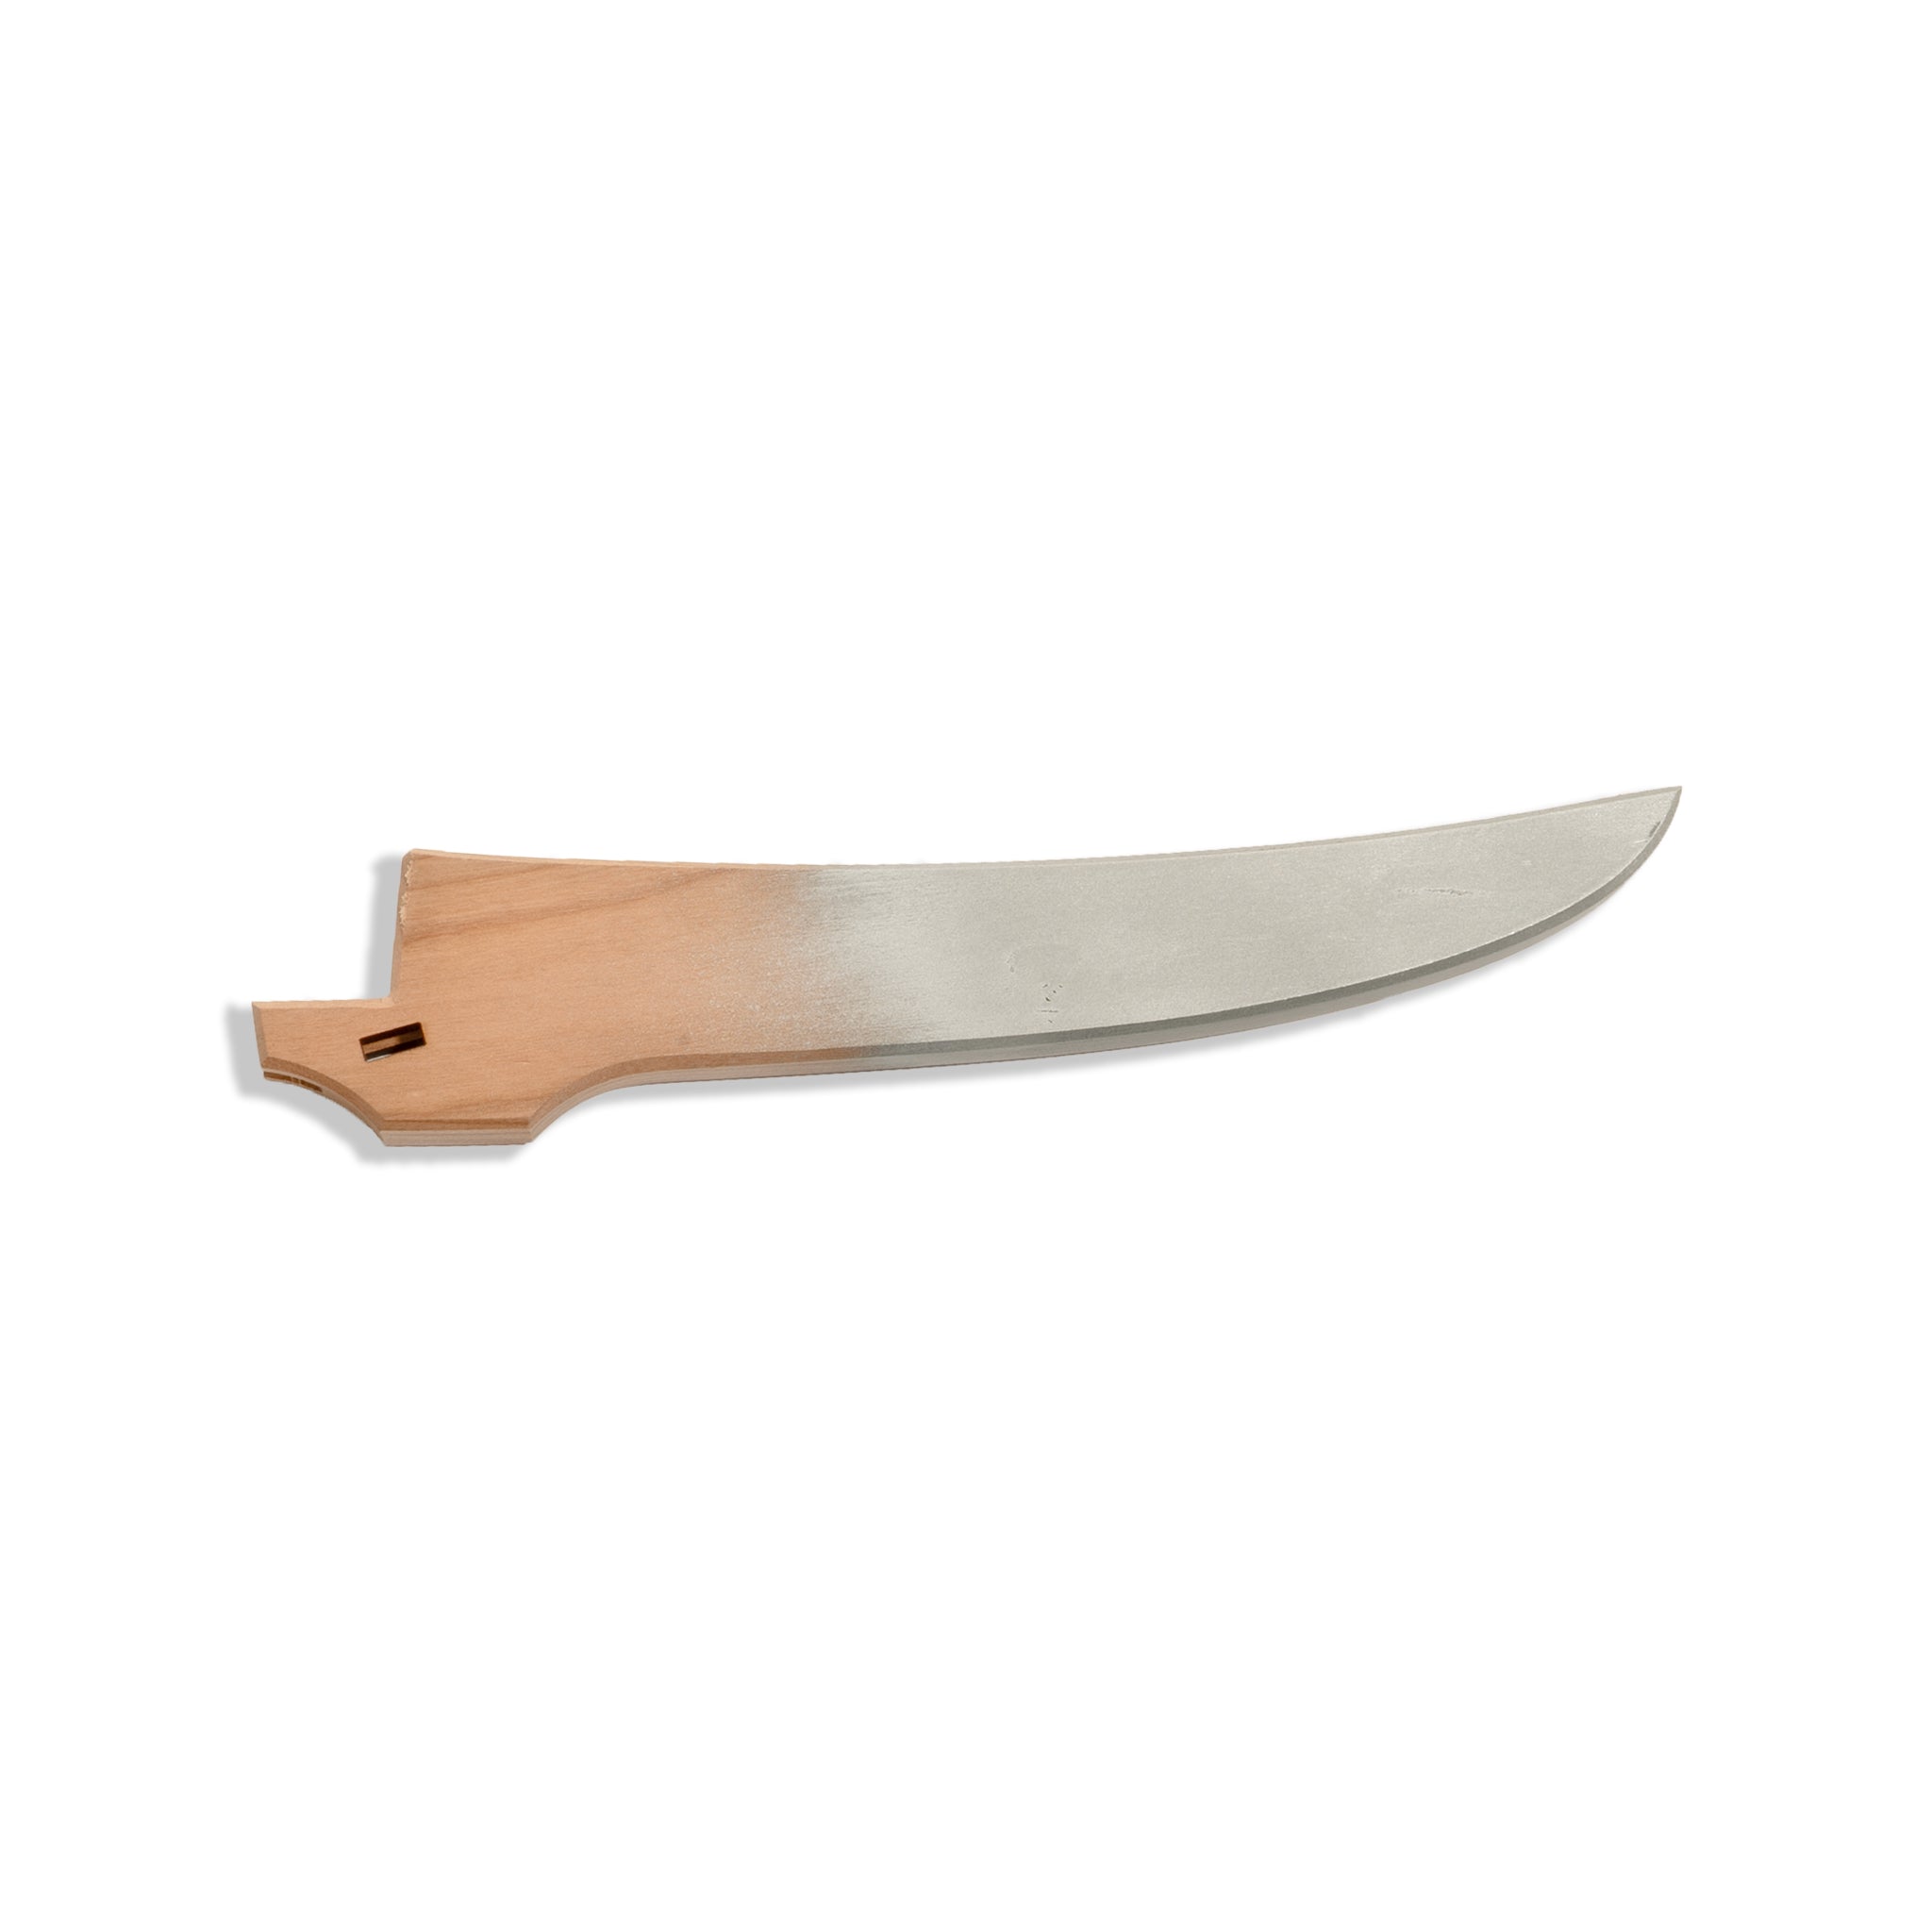 Silver painted and natural cherrywood saya knife cover for Town Cutler Ag 47 Curved Boning Knife